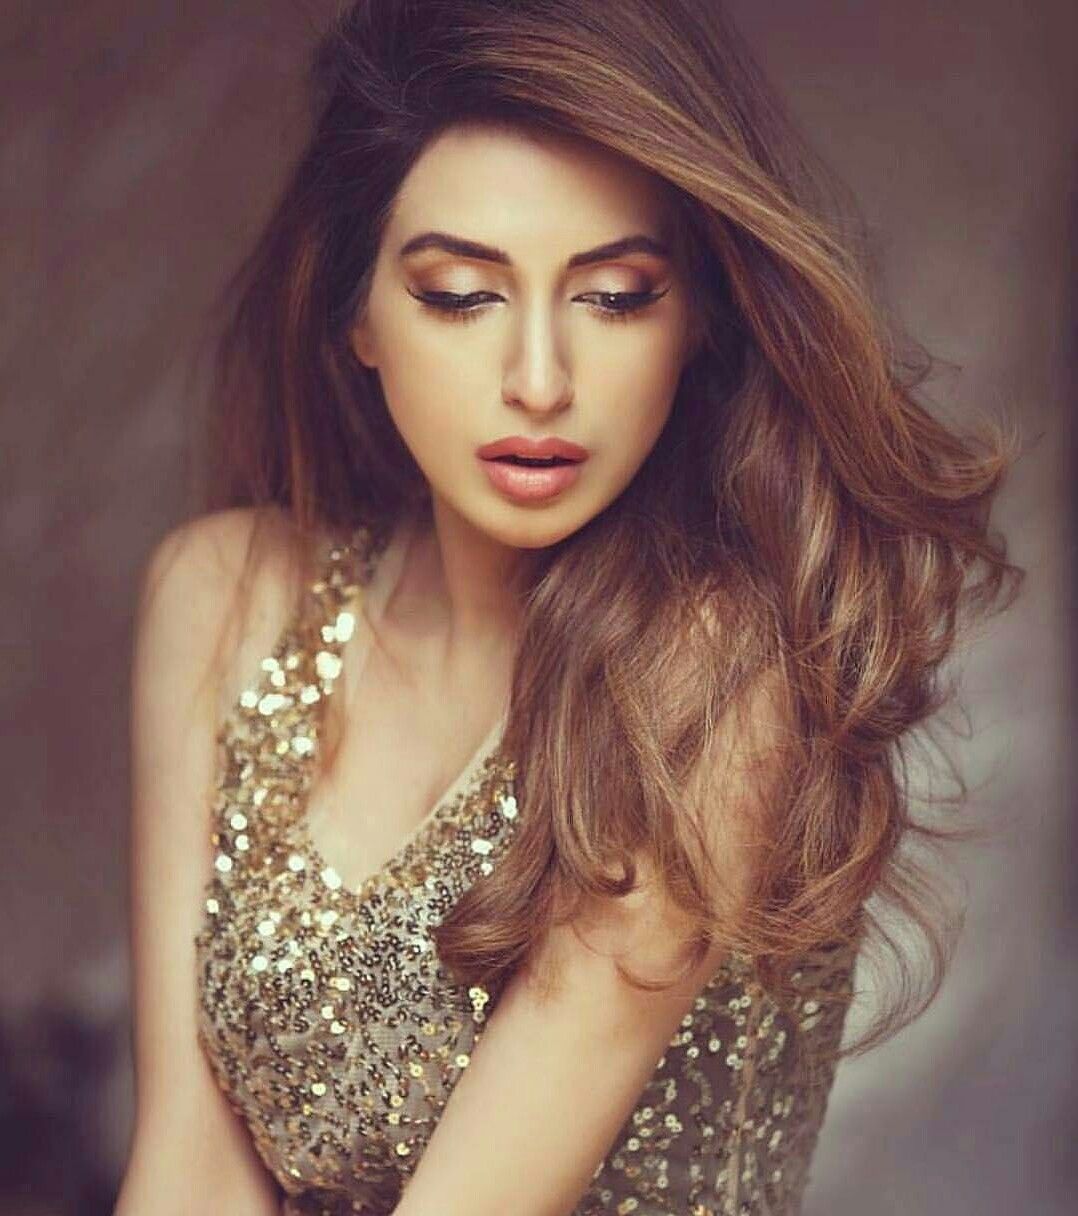 Here we have got some of the bold pictures of Iman Ali that will leave you spellbound.